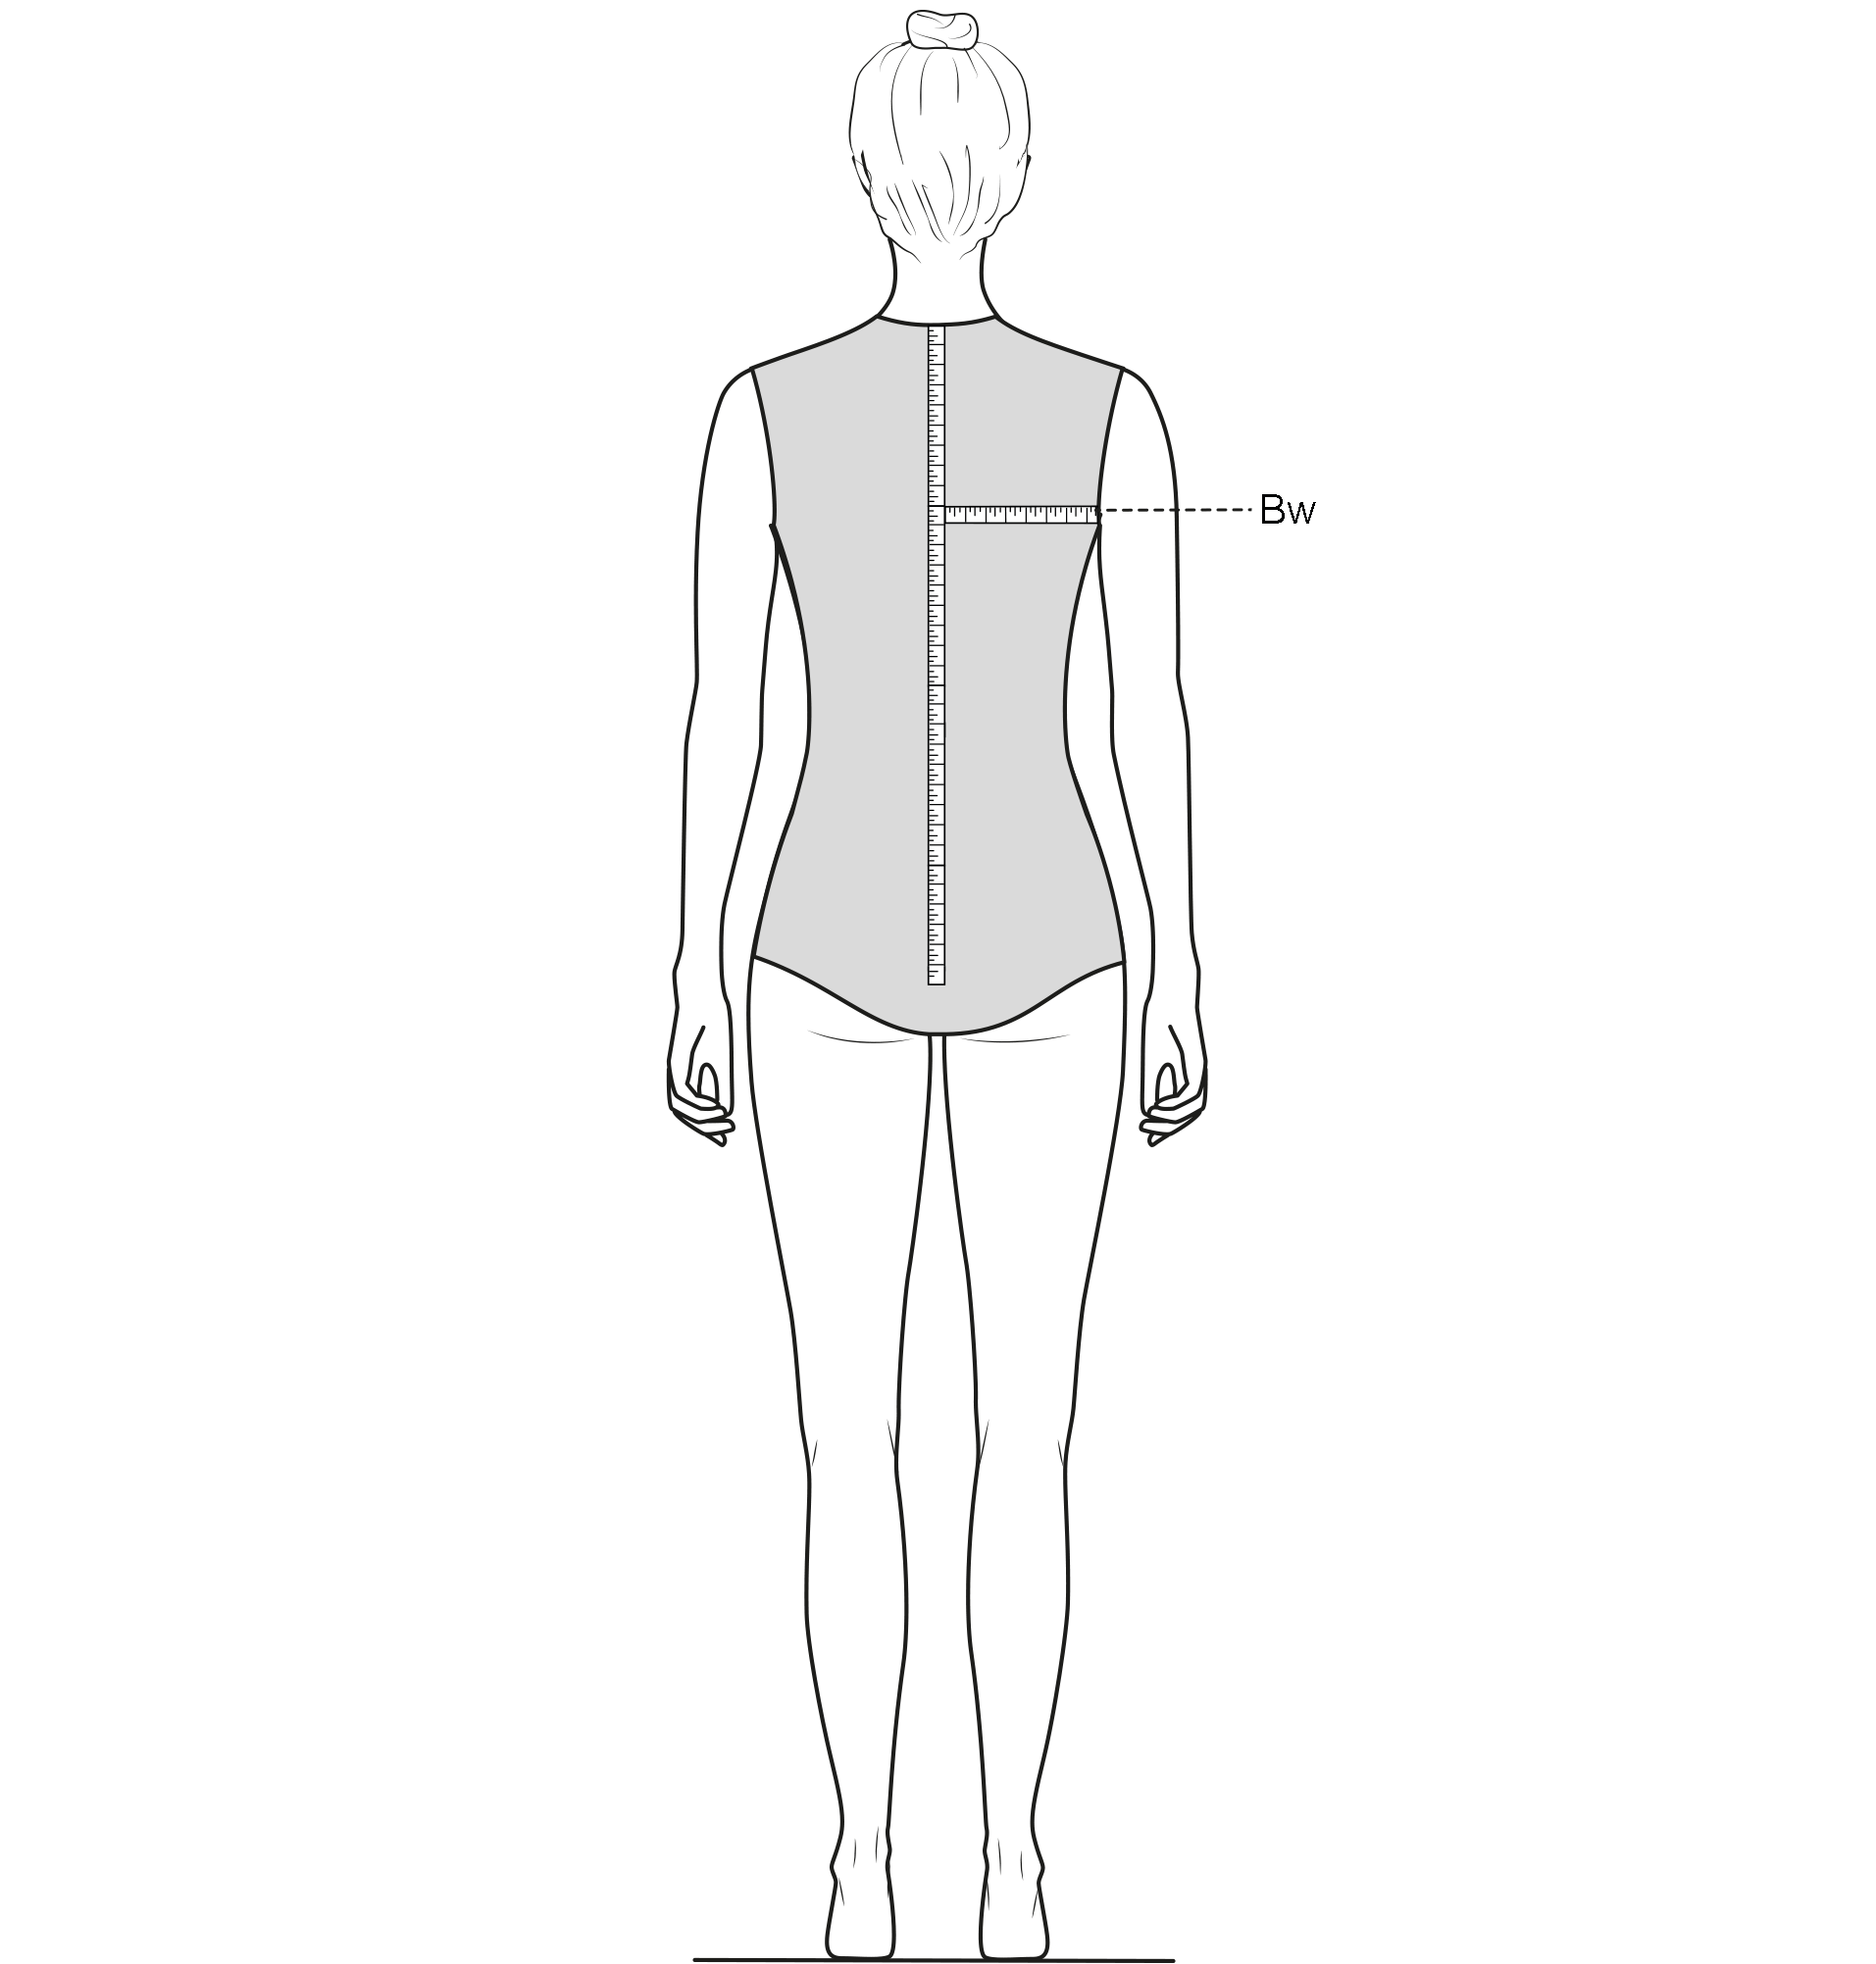 This figure shows the measurement of the Back width